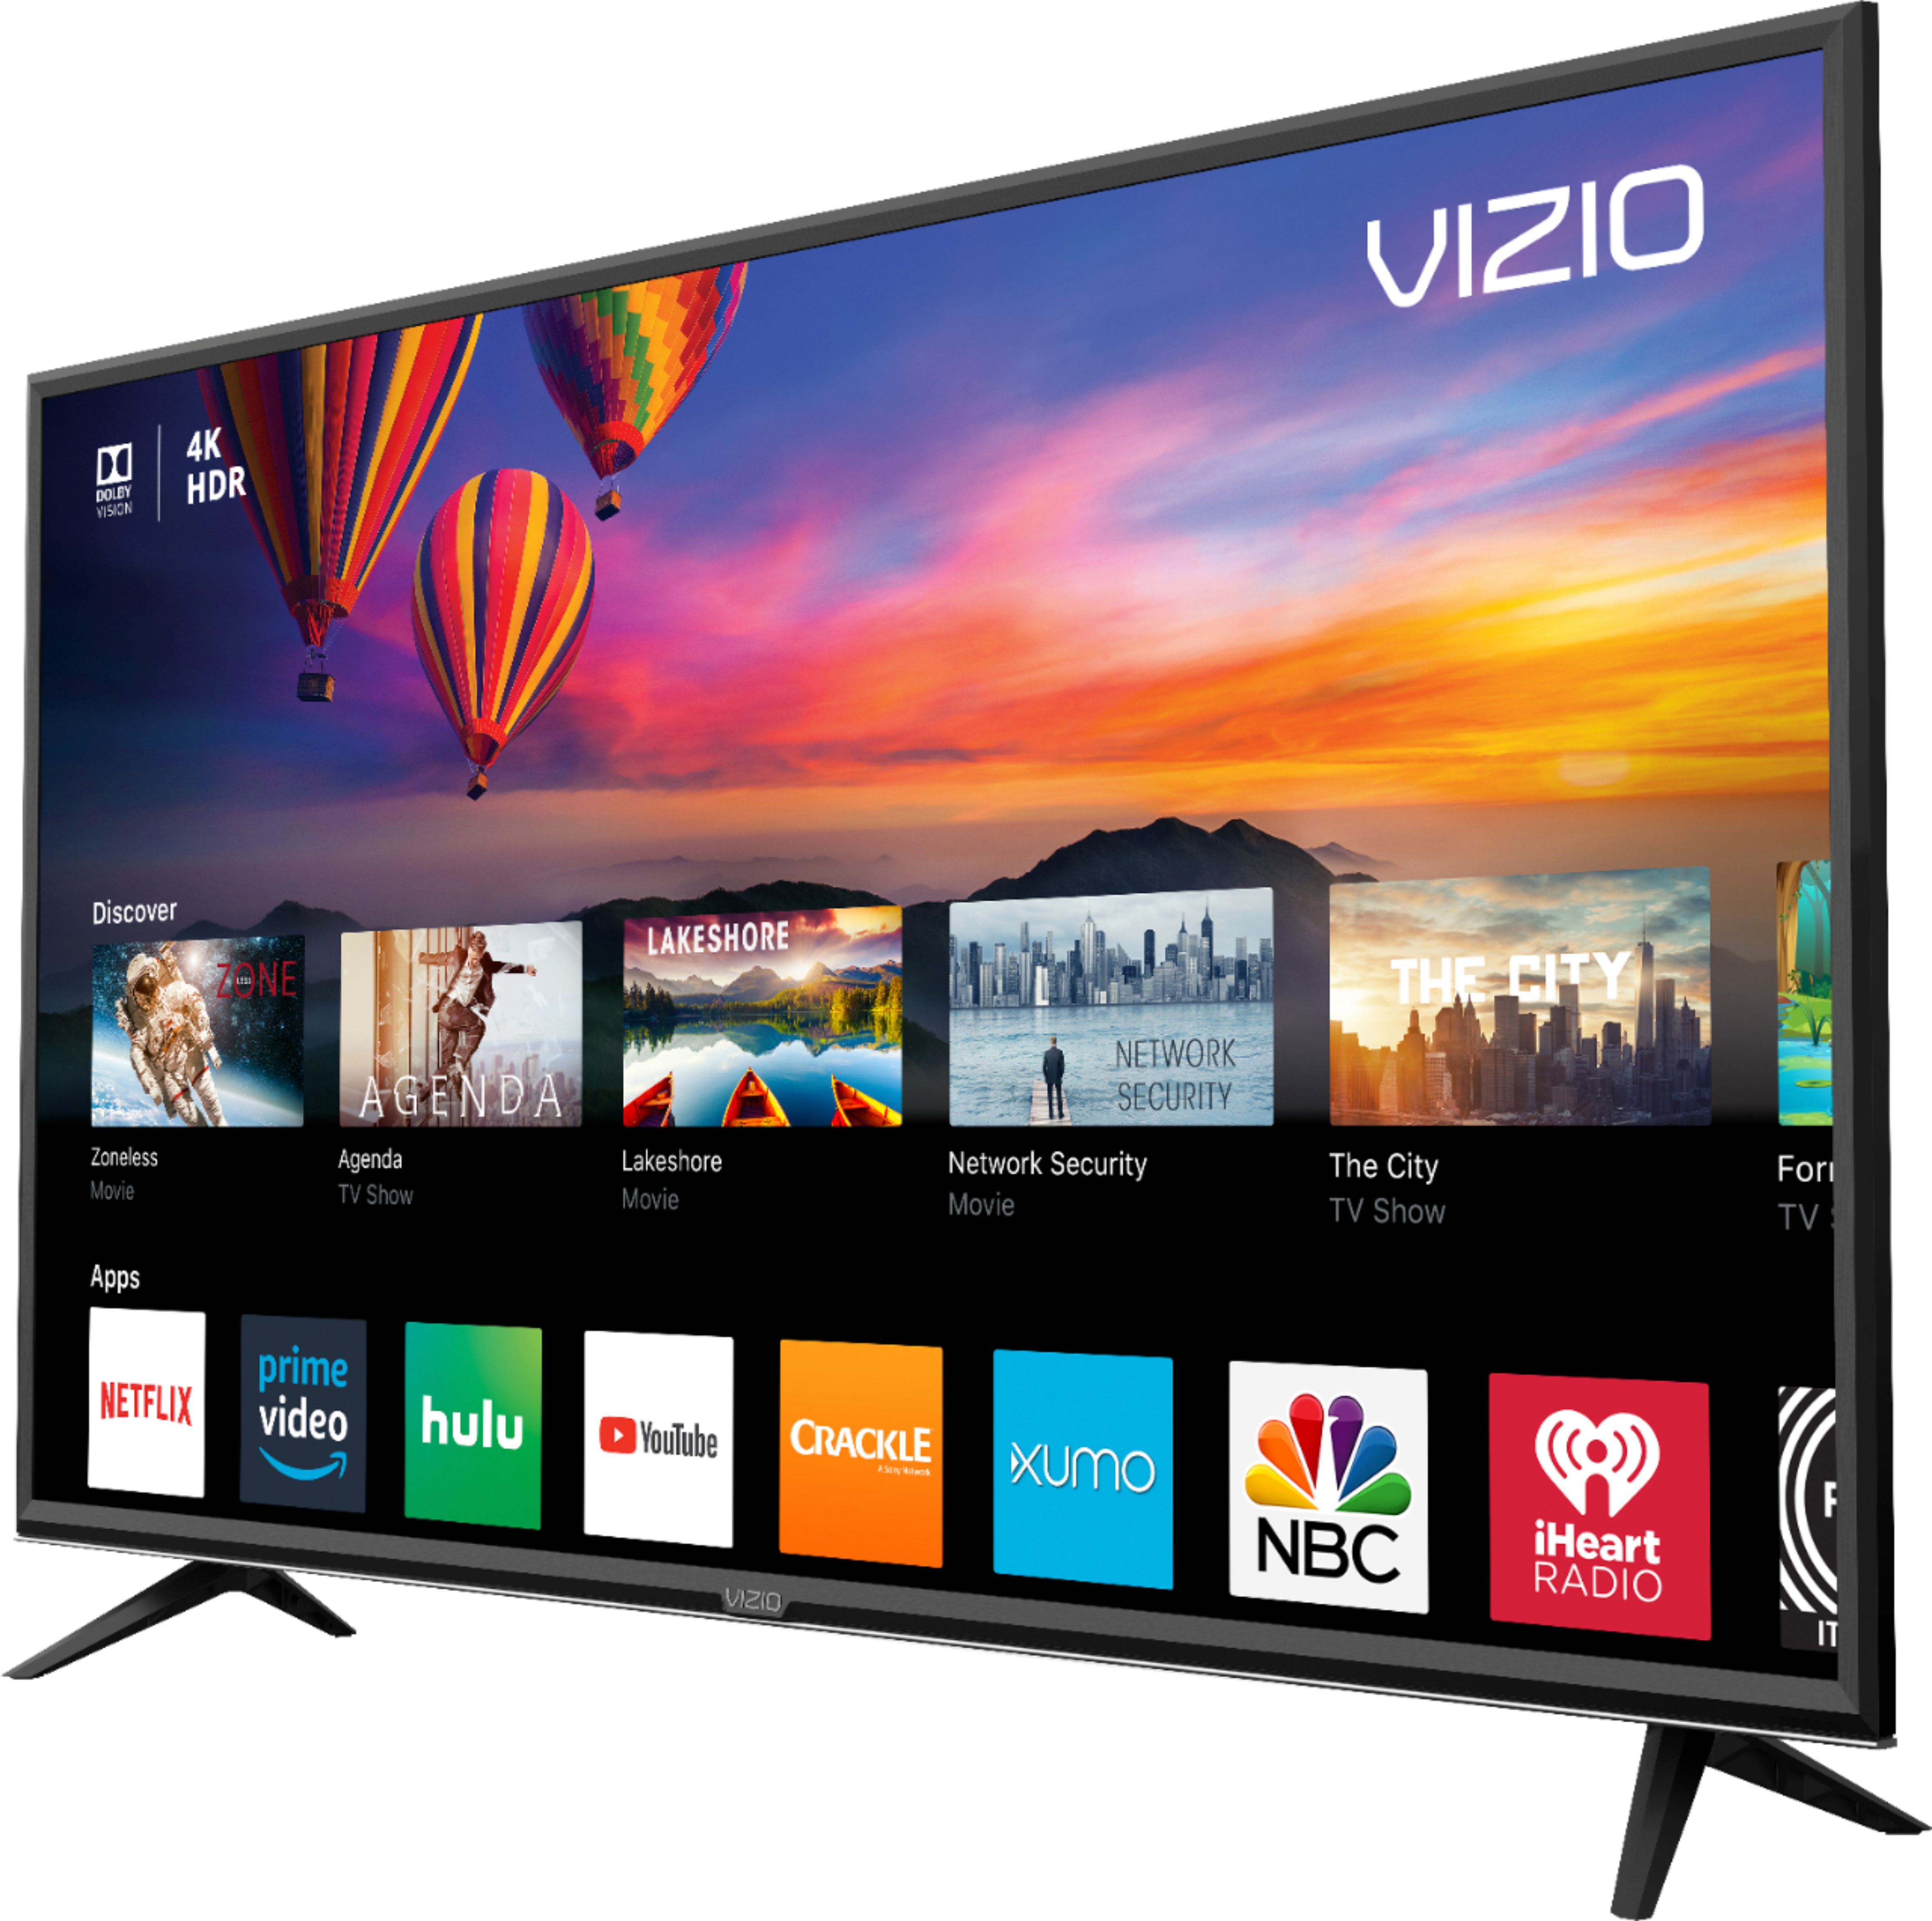 Best Buy VIZIO 75" Class LED ESeries 2160p Smart 4K UHD TV with HDR